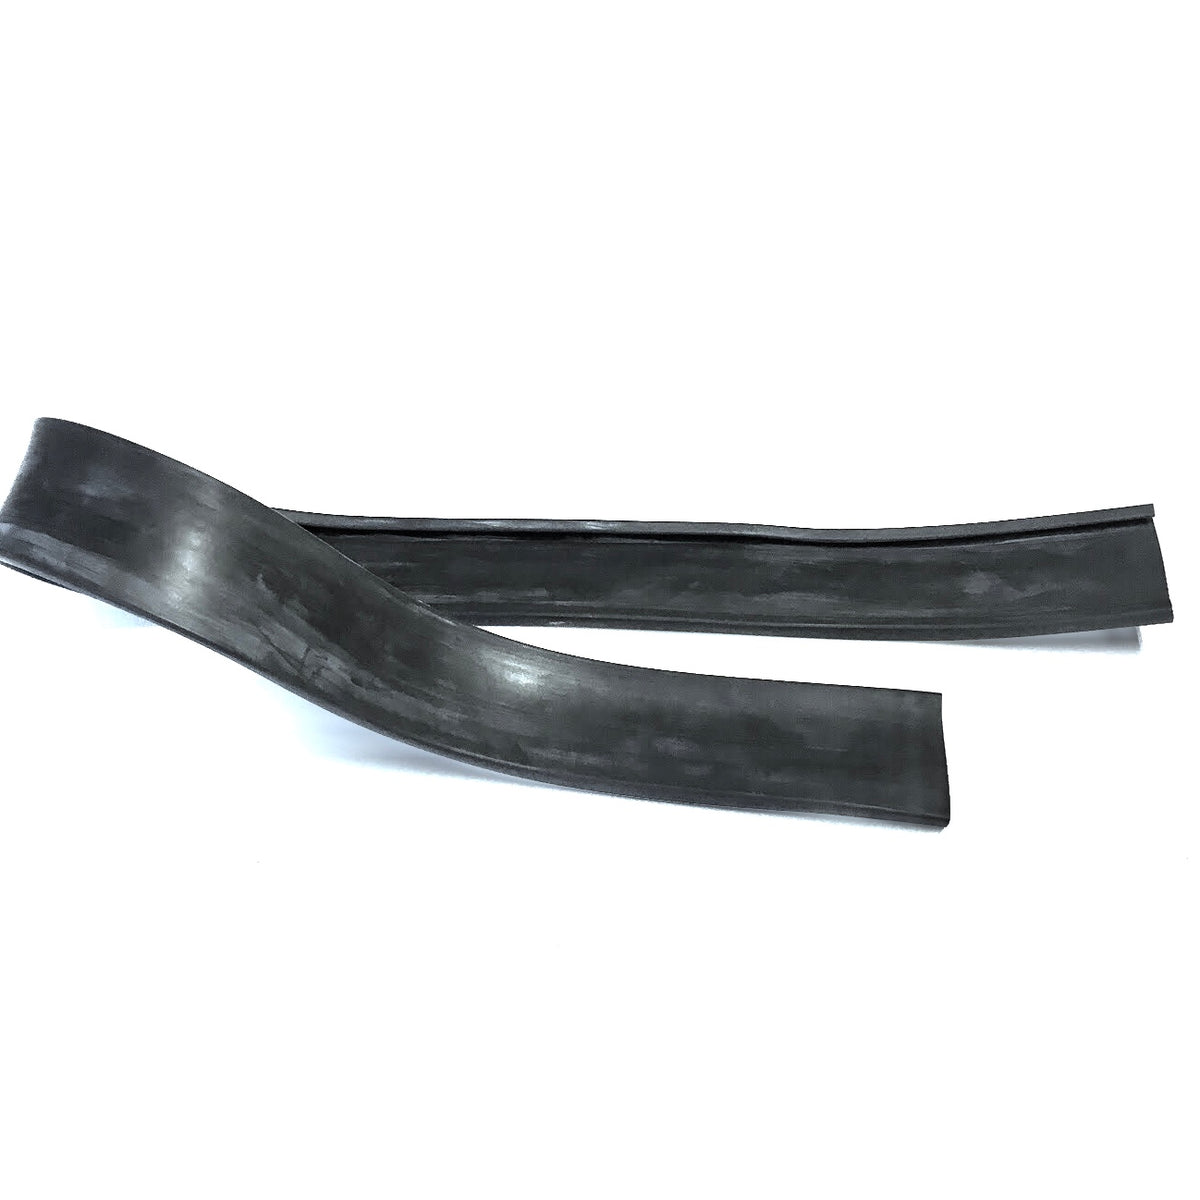 EMC RUBBER STRIP FOR BAG HOLDER ON LOW SPEED VEHICLES